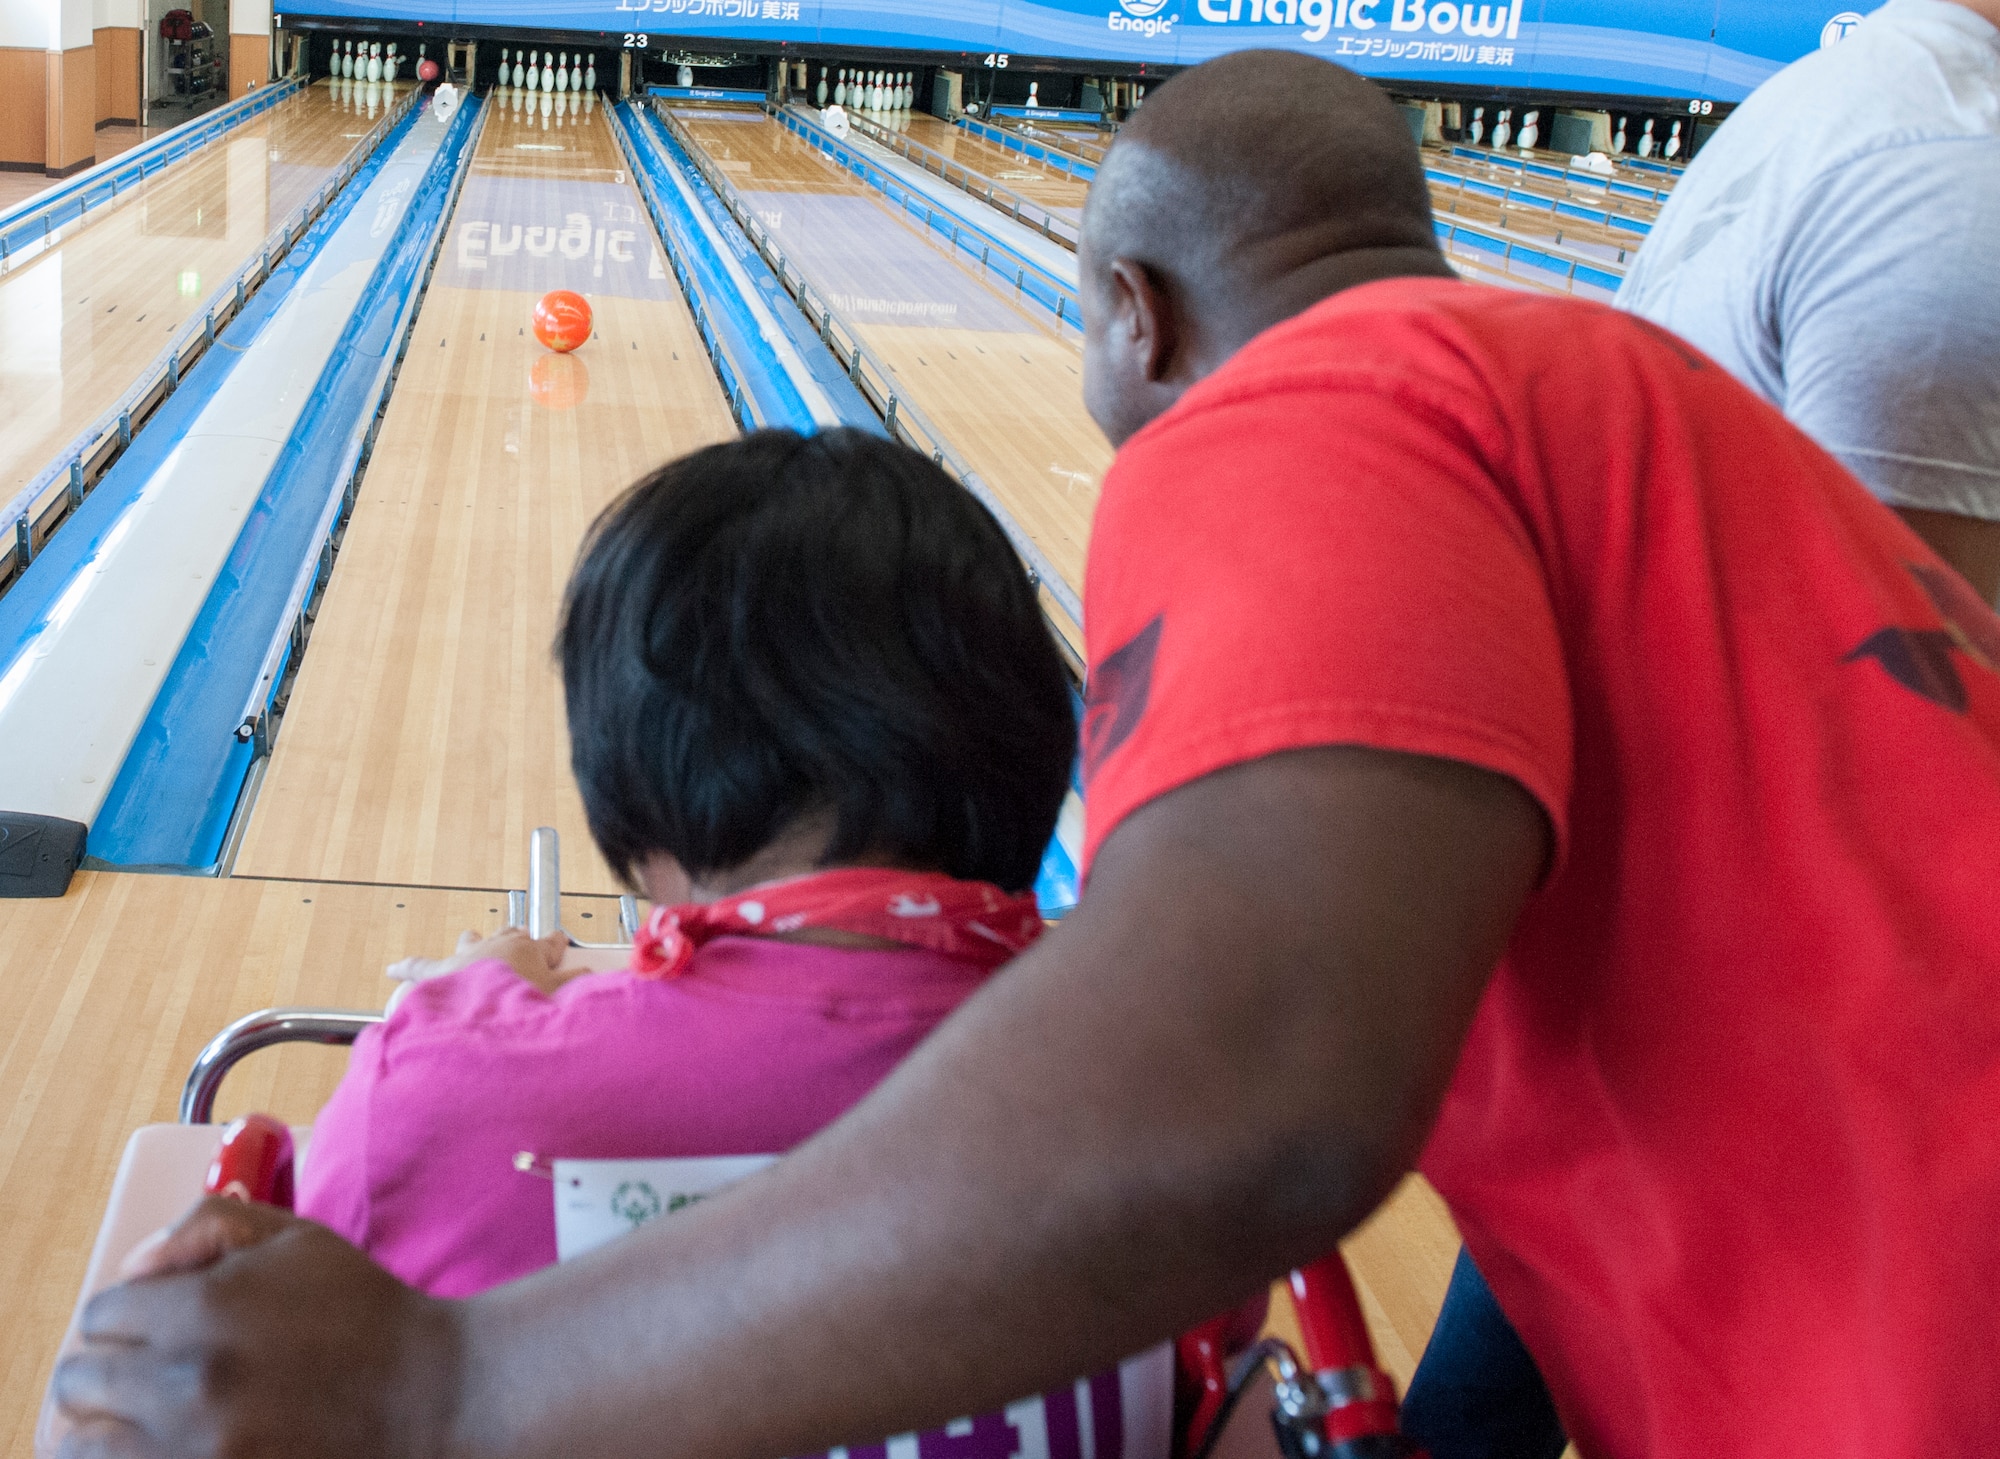 U.S. Air Force Master Sgt. Casey Southern, 909th Air Refueling Squadron boom operator, and Ayami, Kadena Special Olympics athlete, watch the bowling ball roll down the lane during the KSO bowling event at Enagic Bowling in Mihama, Japan, Sept. 19, 2015. Every year, Airmen from Kadena Air Base help organize and promote this community event for people with disabilities. (U.S. Air Force photo by Airman 1st Class Corey M. Pettis)